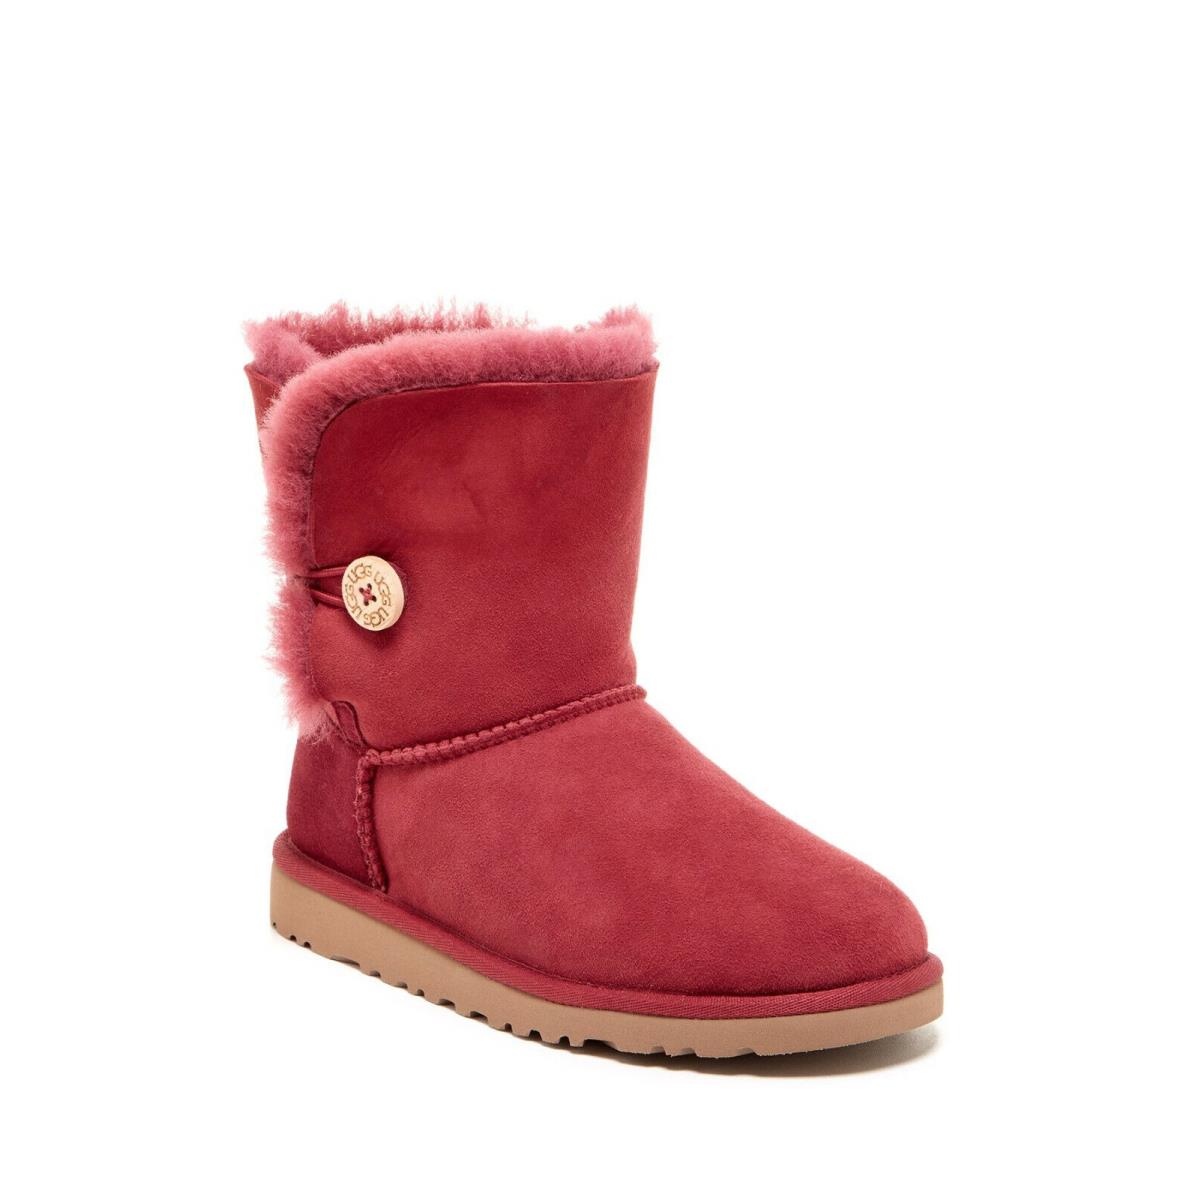 Girl Ugg Australia Bailey Button Boots Red Twinface Sheepskin 5991 Youth Size - Red